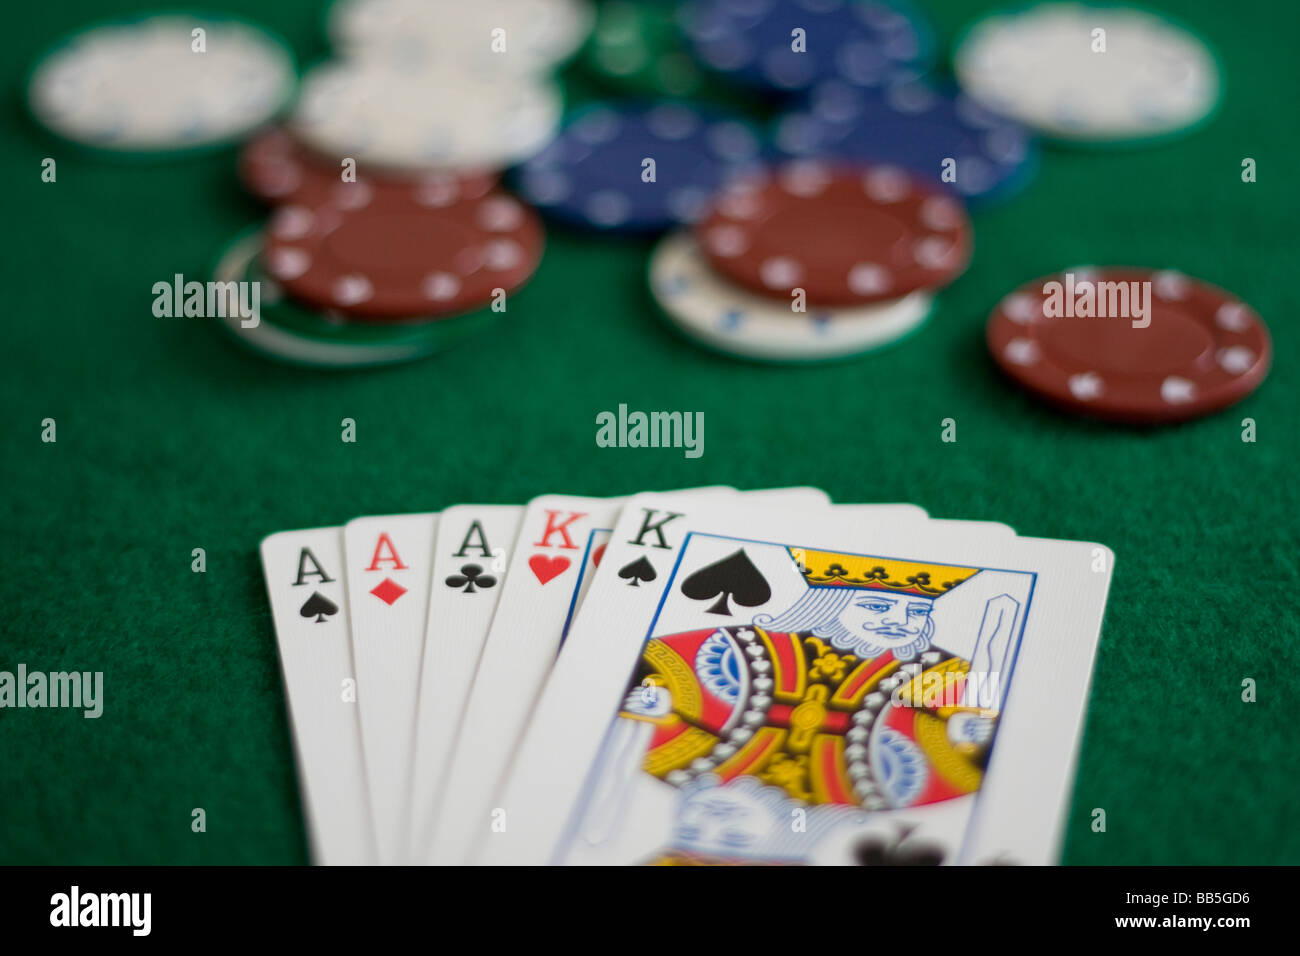 Full House Poker Hand on Green Baize with Chips Stock Photo